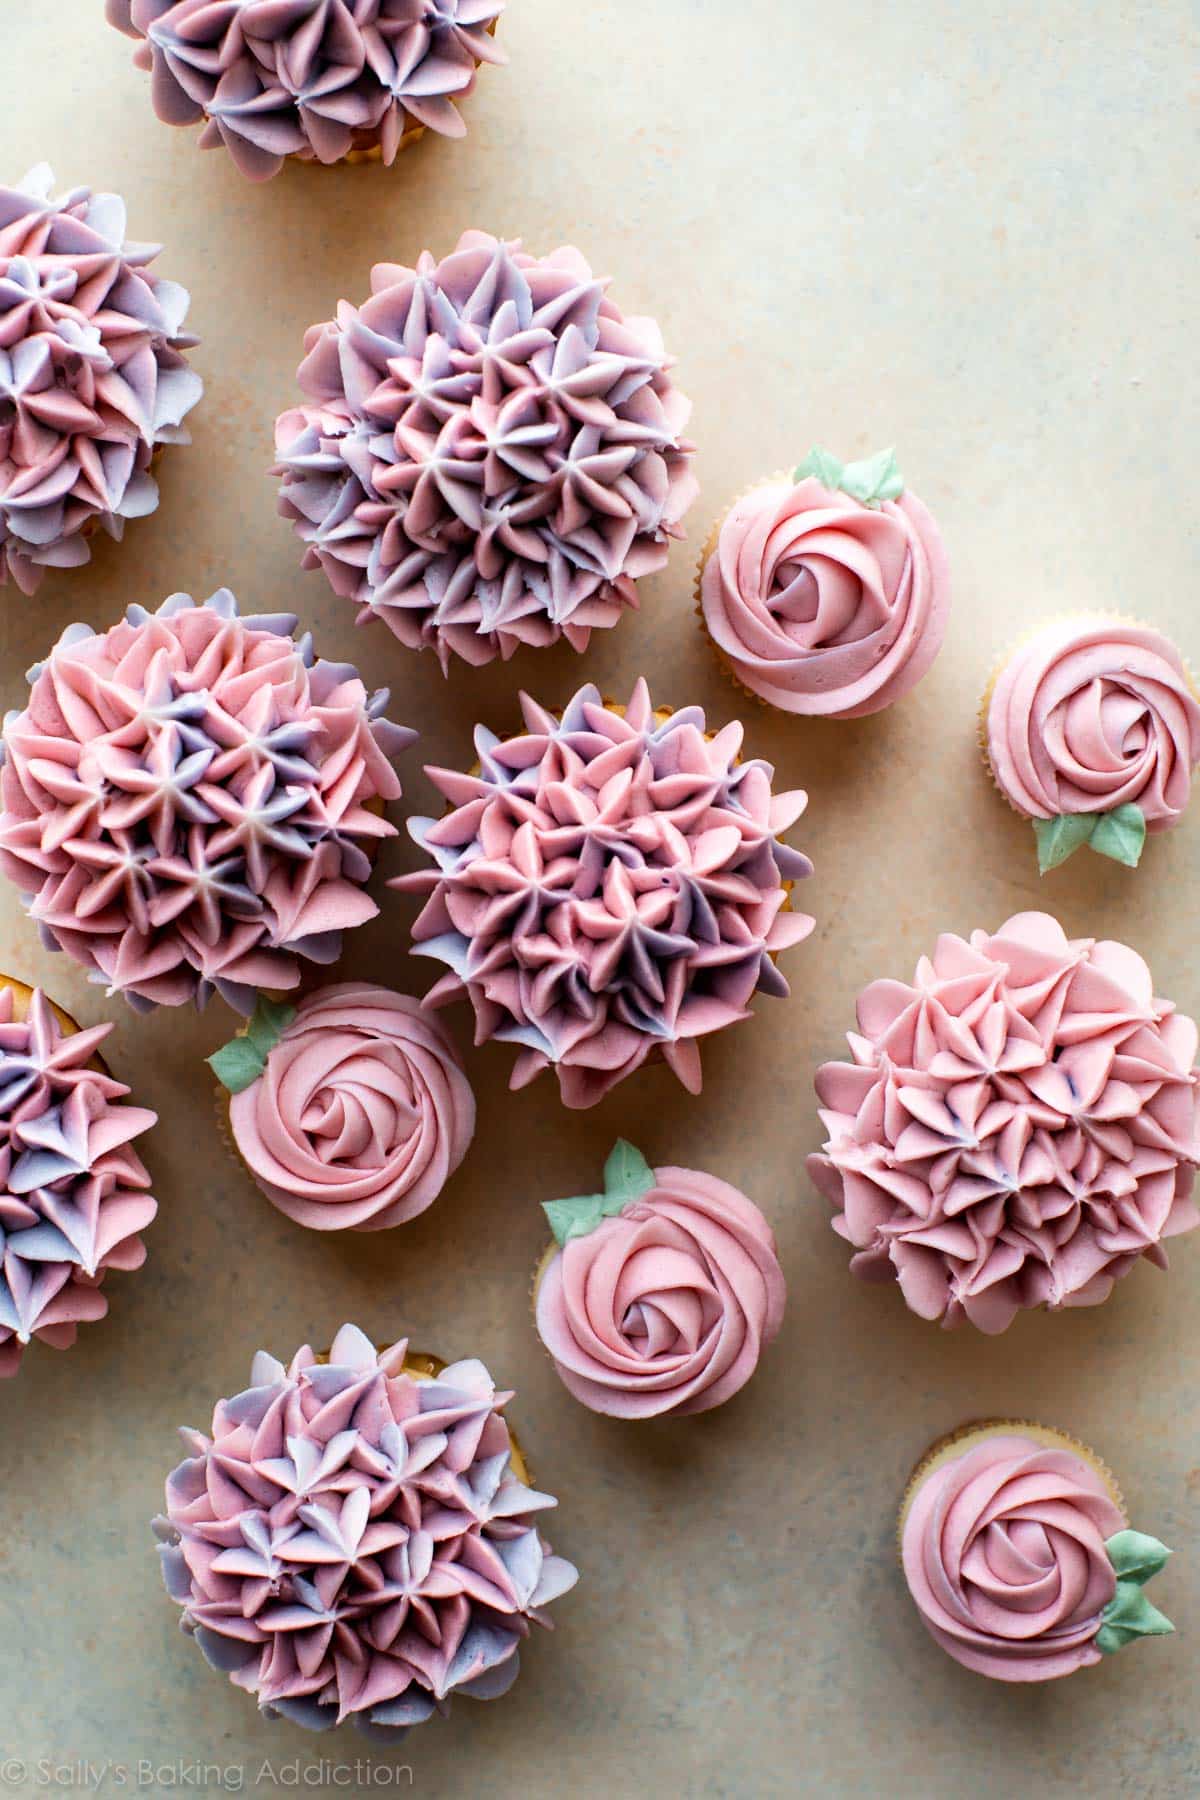 cupcakes decorated with buttercream like hydrangea and roses